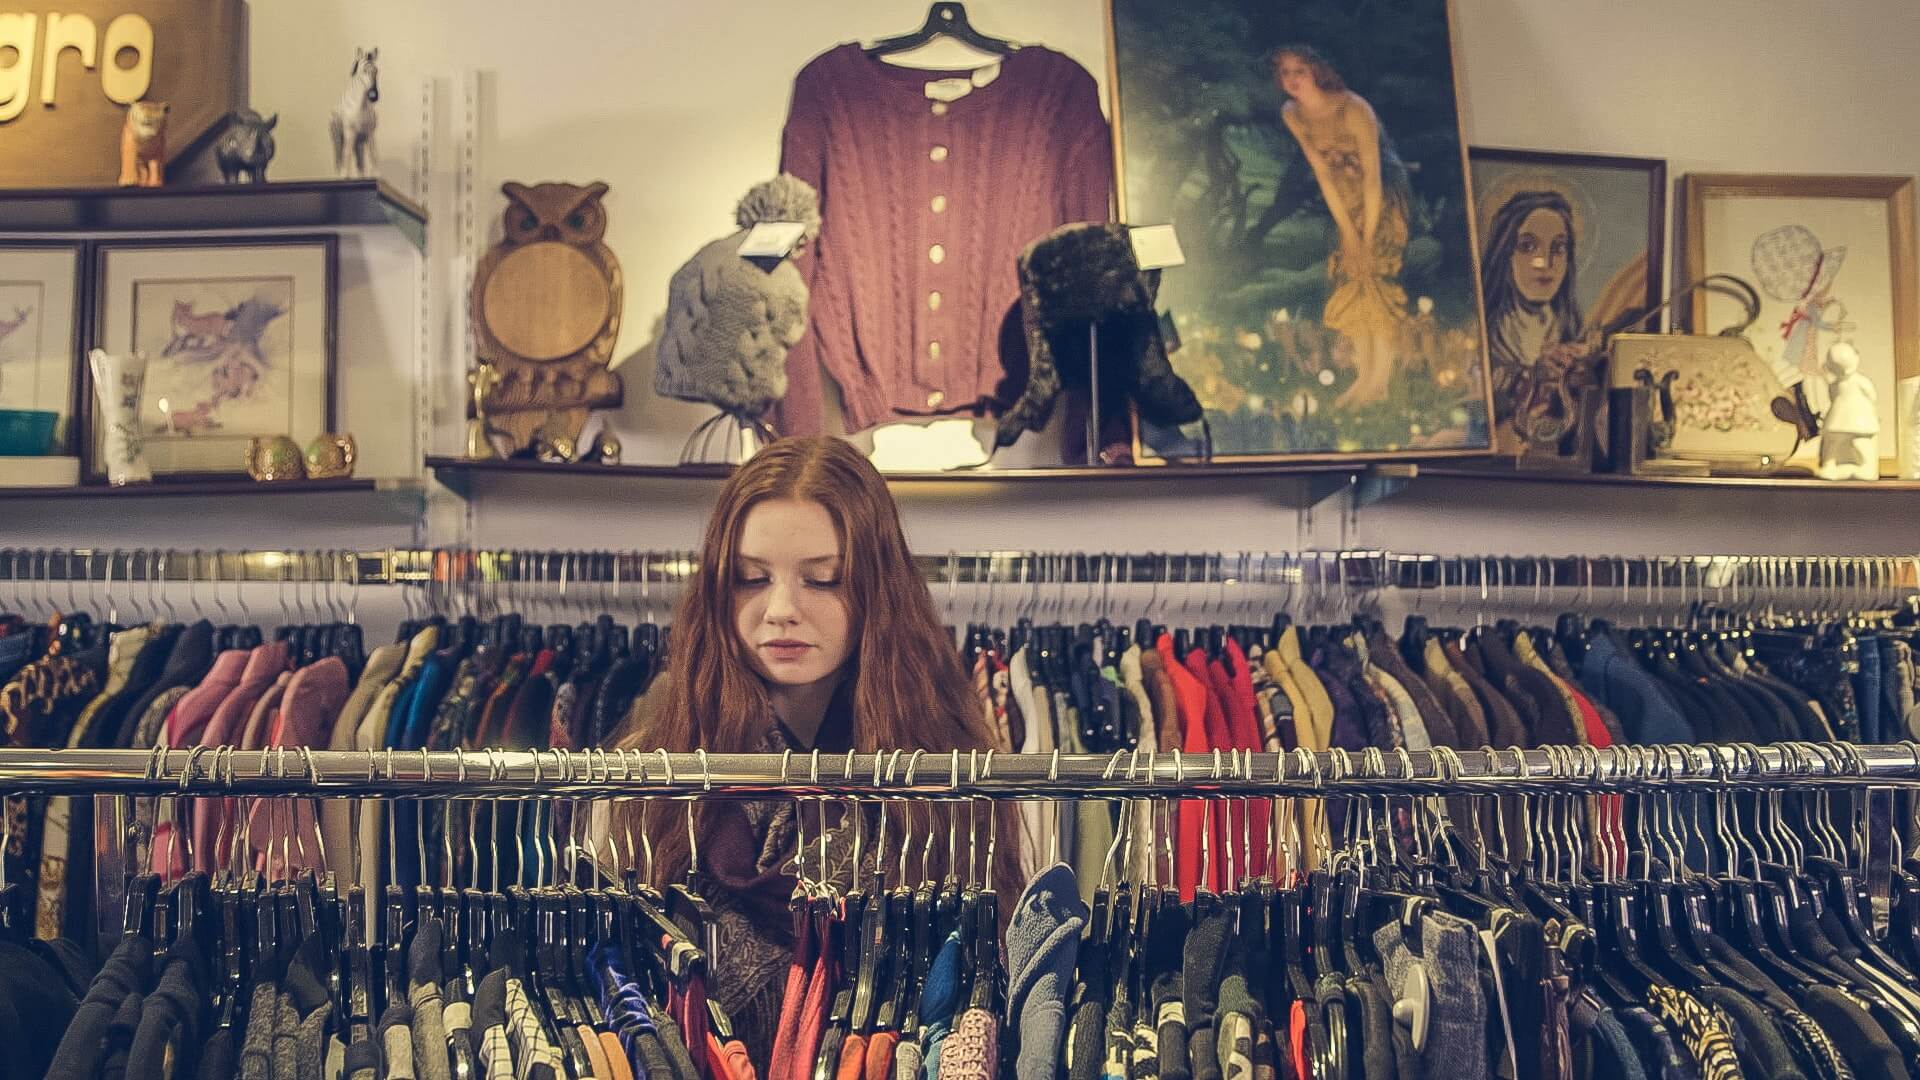 A women looking at a clothing rack in a thrift store.